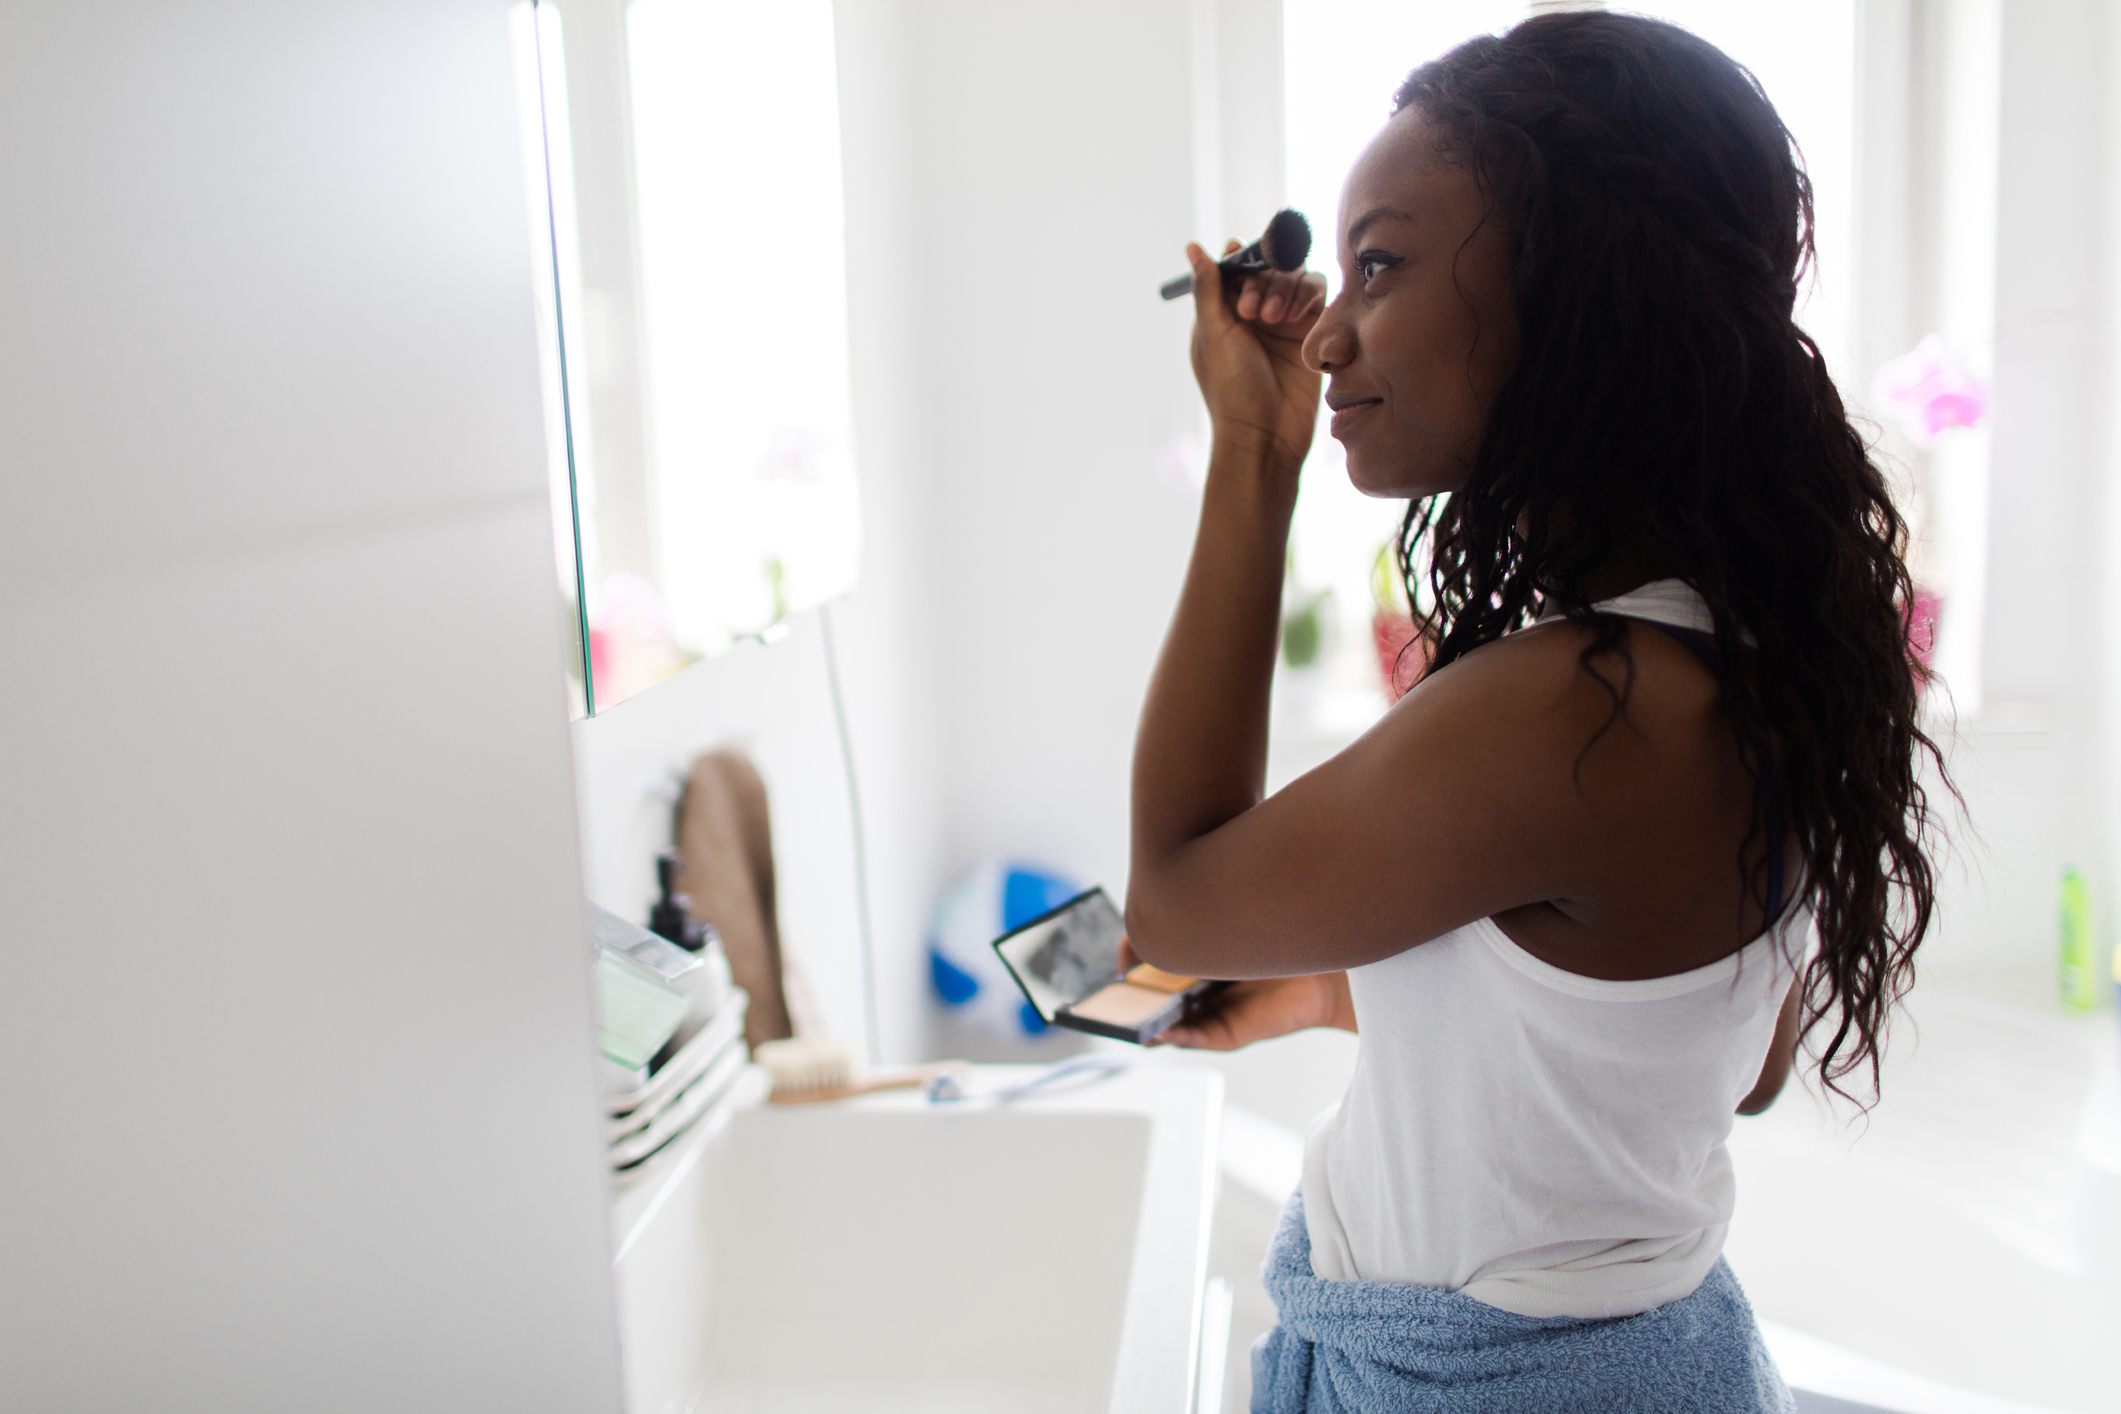 8 Things Women Experience That Men Don't Have To Think About